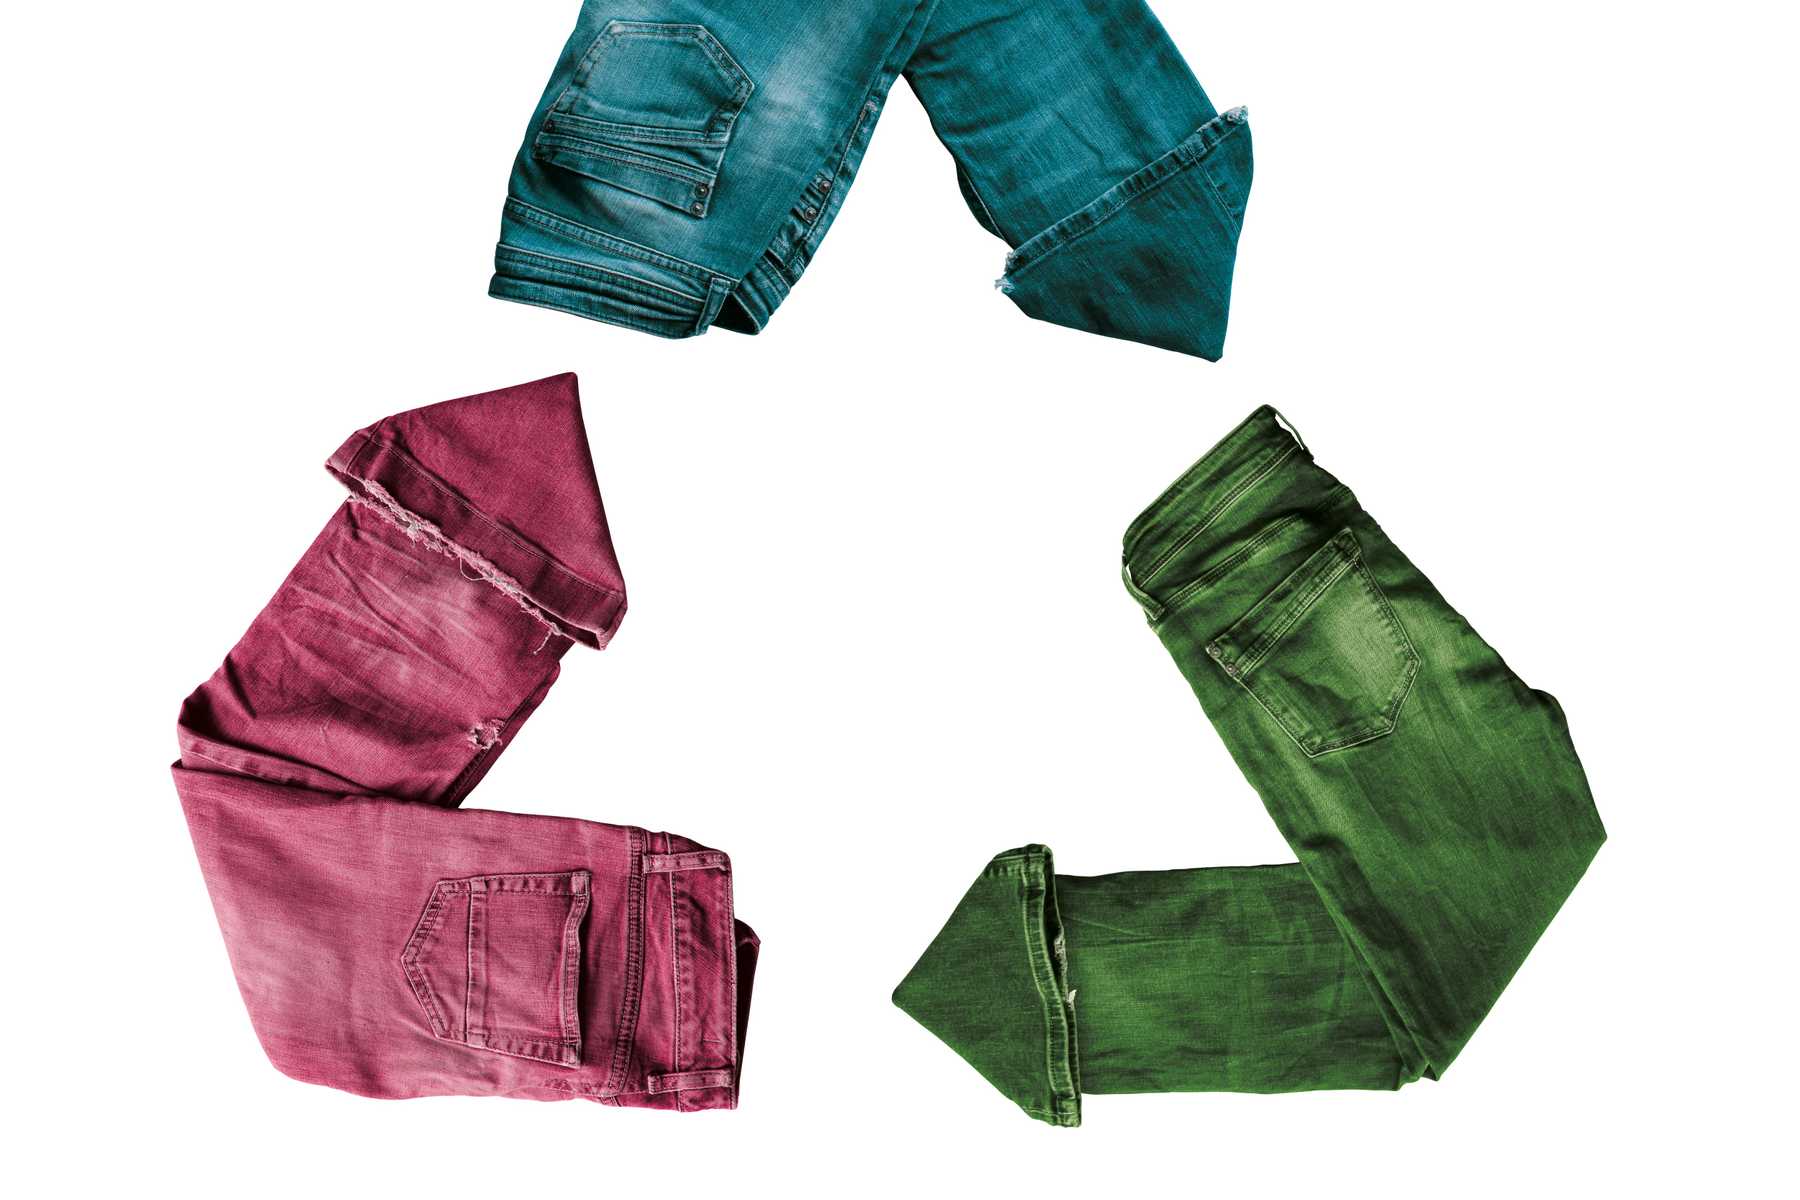 Recycling clothes – Towards sustainability